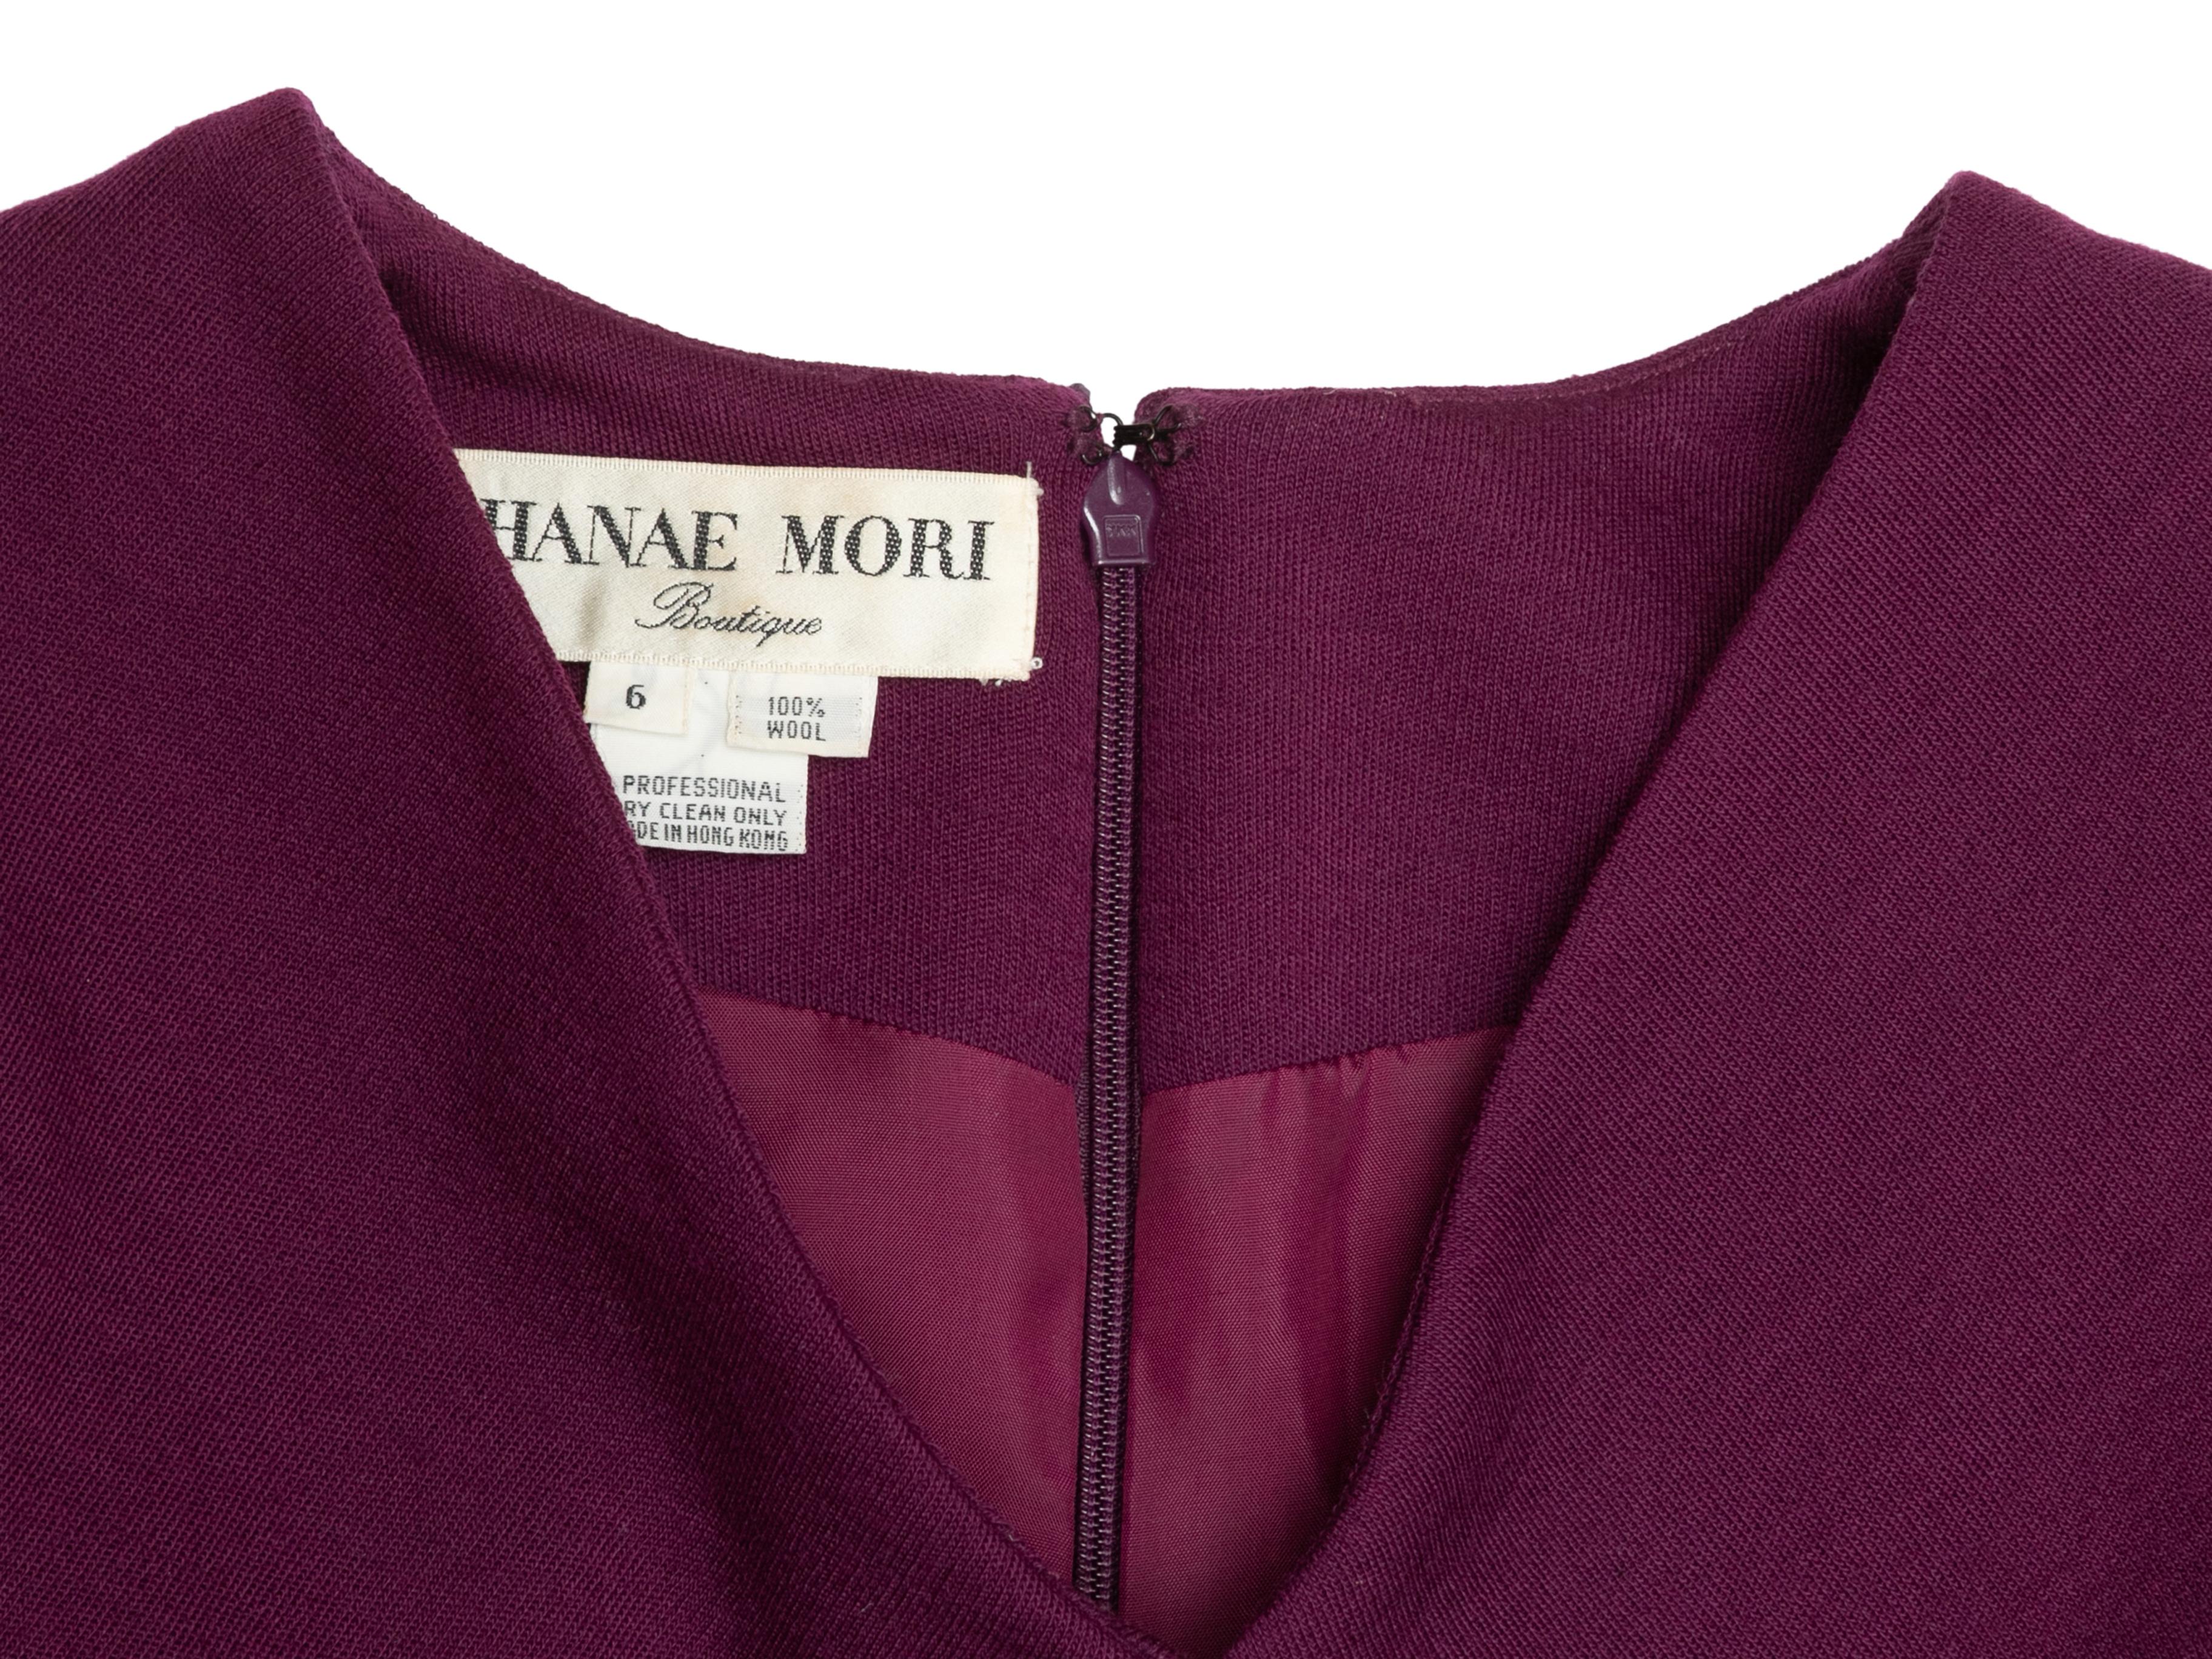 Vintage Eggplant Hanae Mori 1980s Wool Dress Size US 6 In Good Condition For Sale In New York, NY